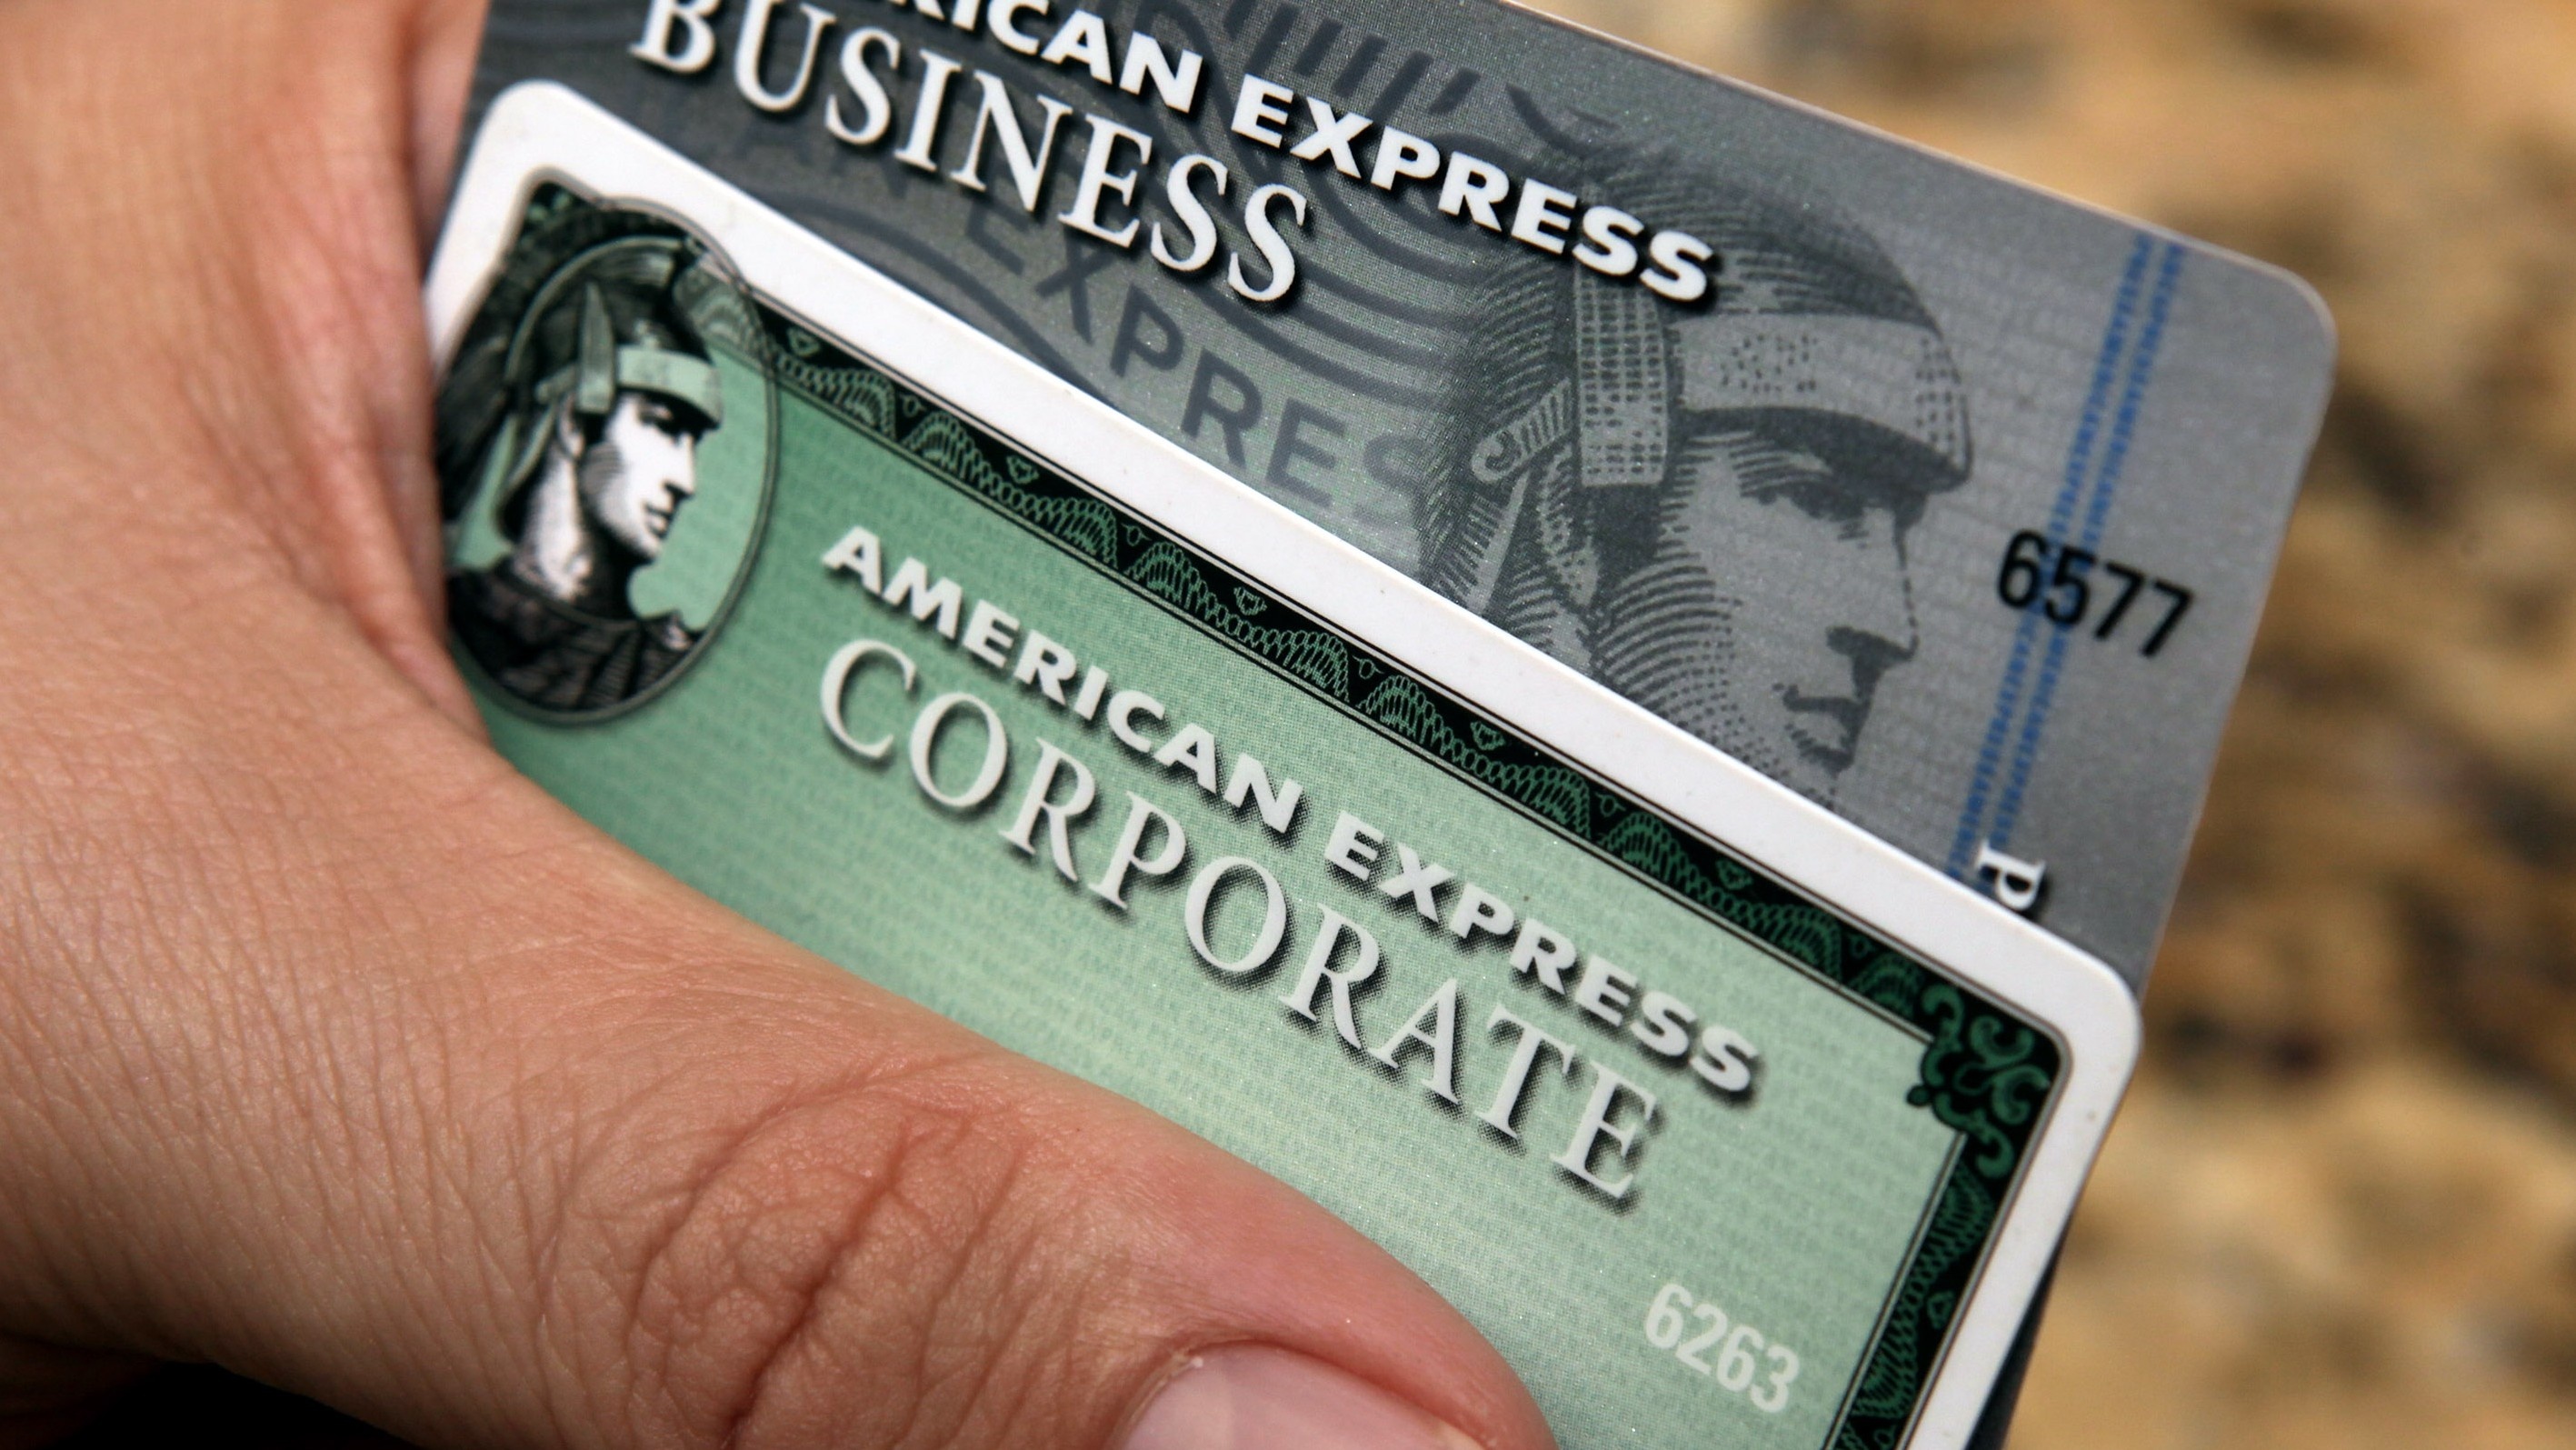 American Express: Cards issued by Amex and processed on the network, Electronic payment cards. 2840x1600 HD Wallpaper.